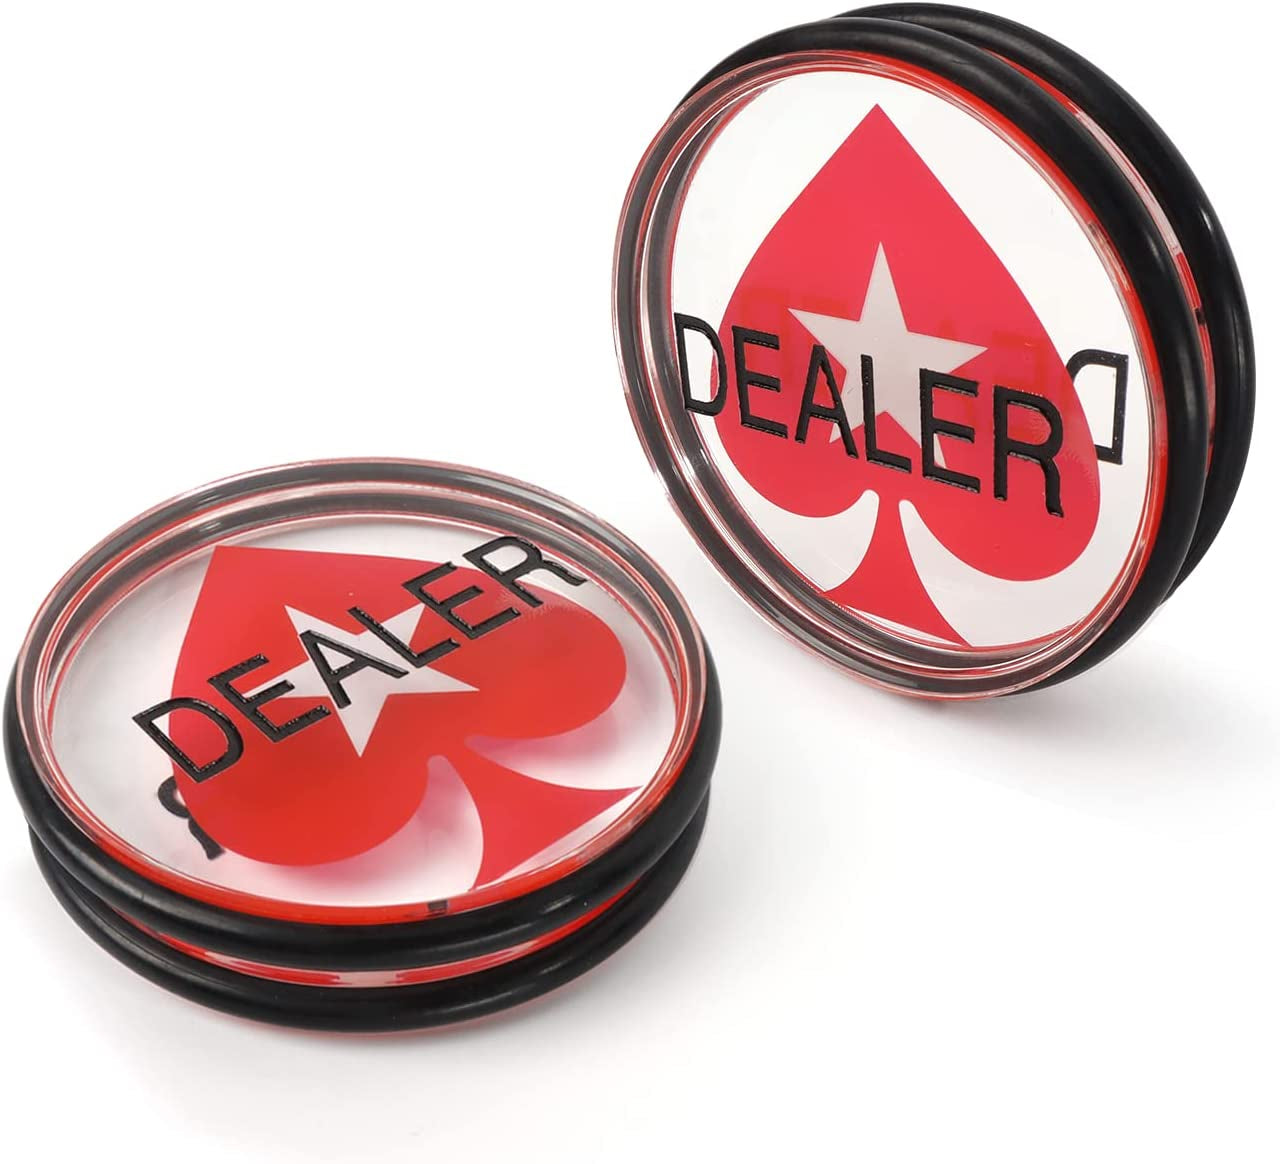 3-Inch Double-Sided Casino Grade Clear Acrylic Poker Dealer Puck Button for Gambling Card Games, Texas Hold 'Em, Poker Nights, Tournaments